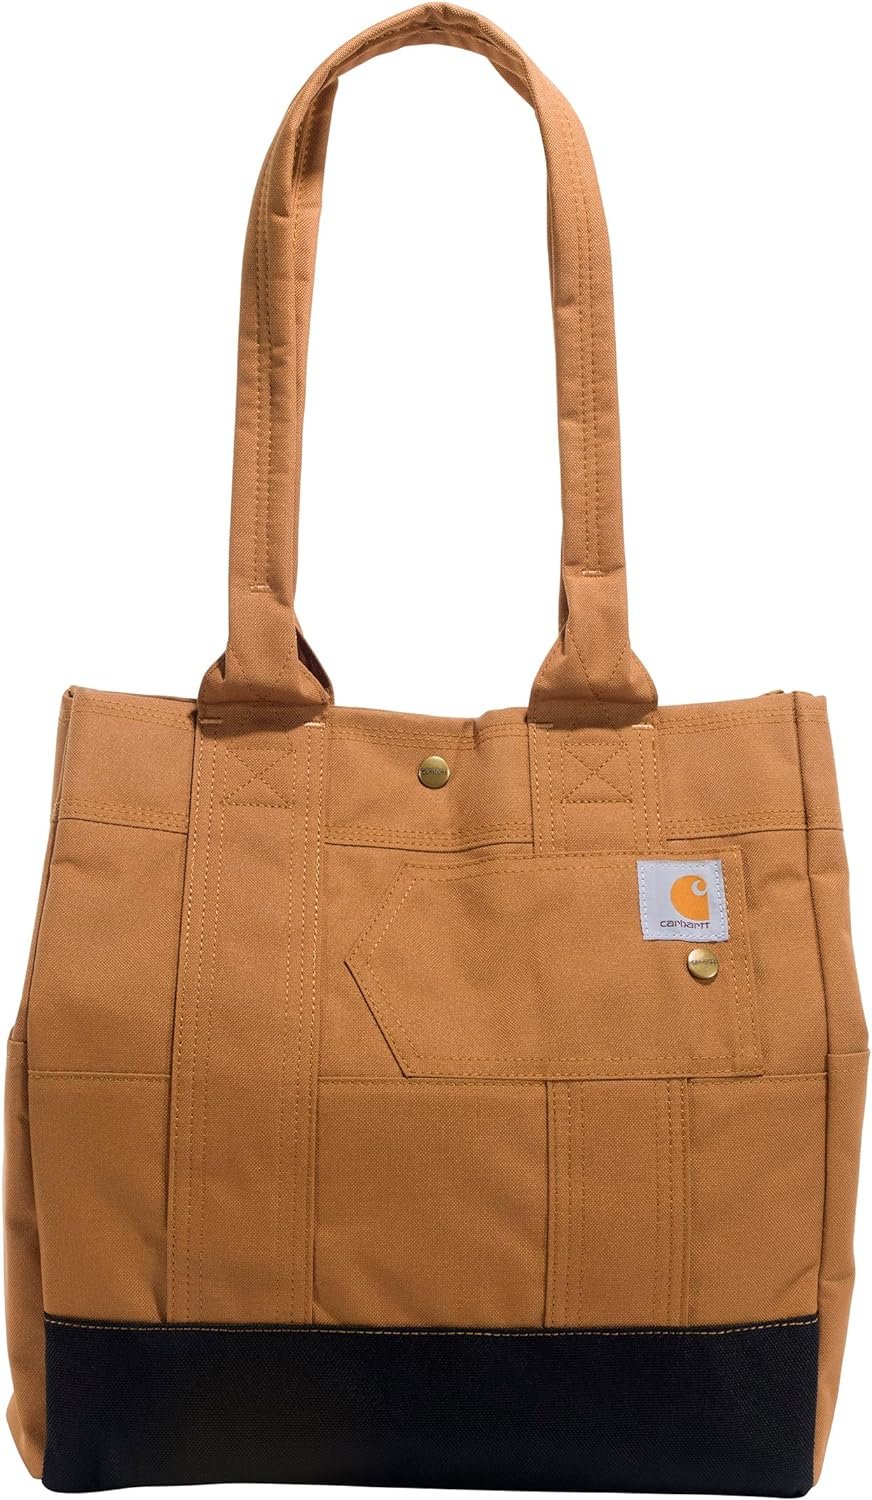 Carhartt Vertical, Durable Tote Bag with Snap Closure, Brown